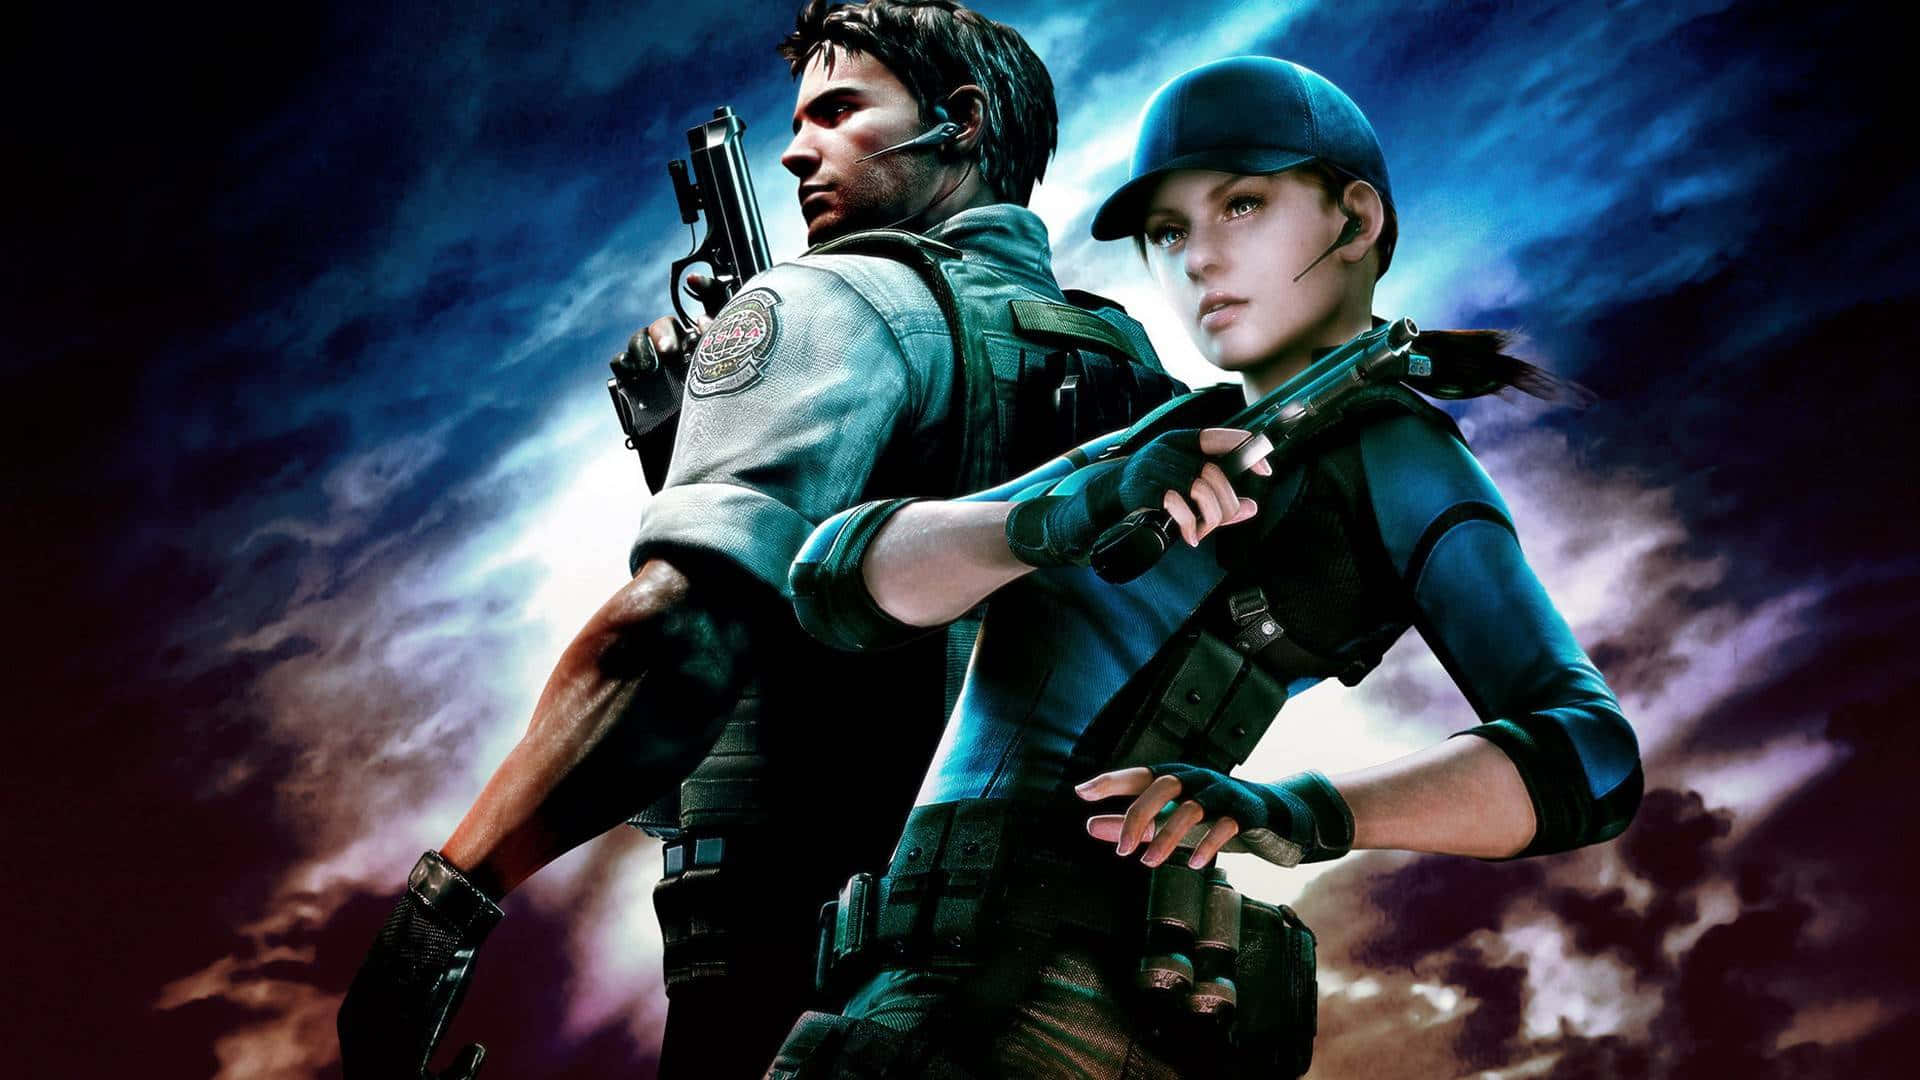 Iconic Resident Evil Characters In Action Wallpaper